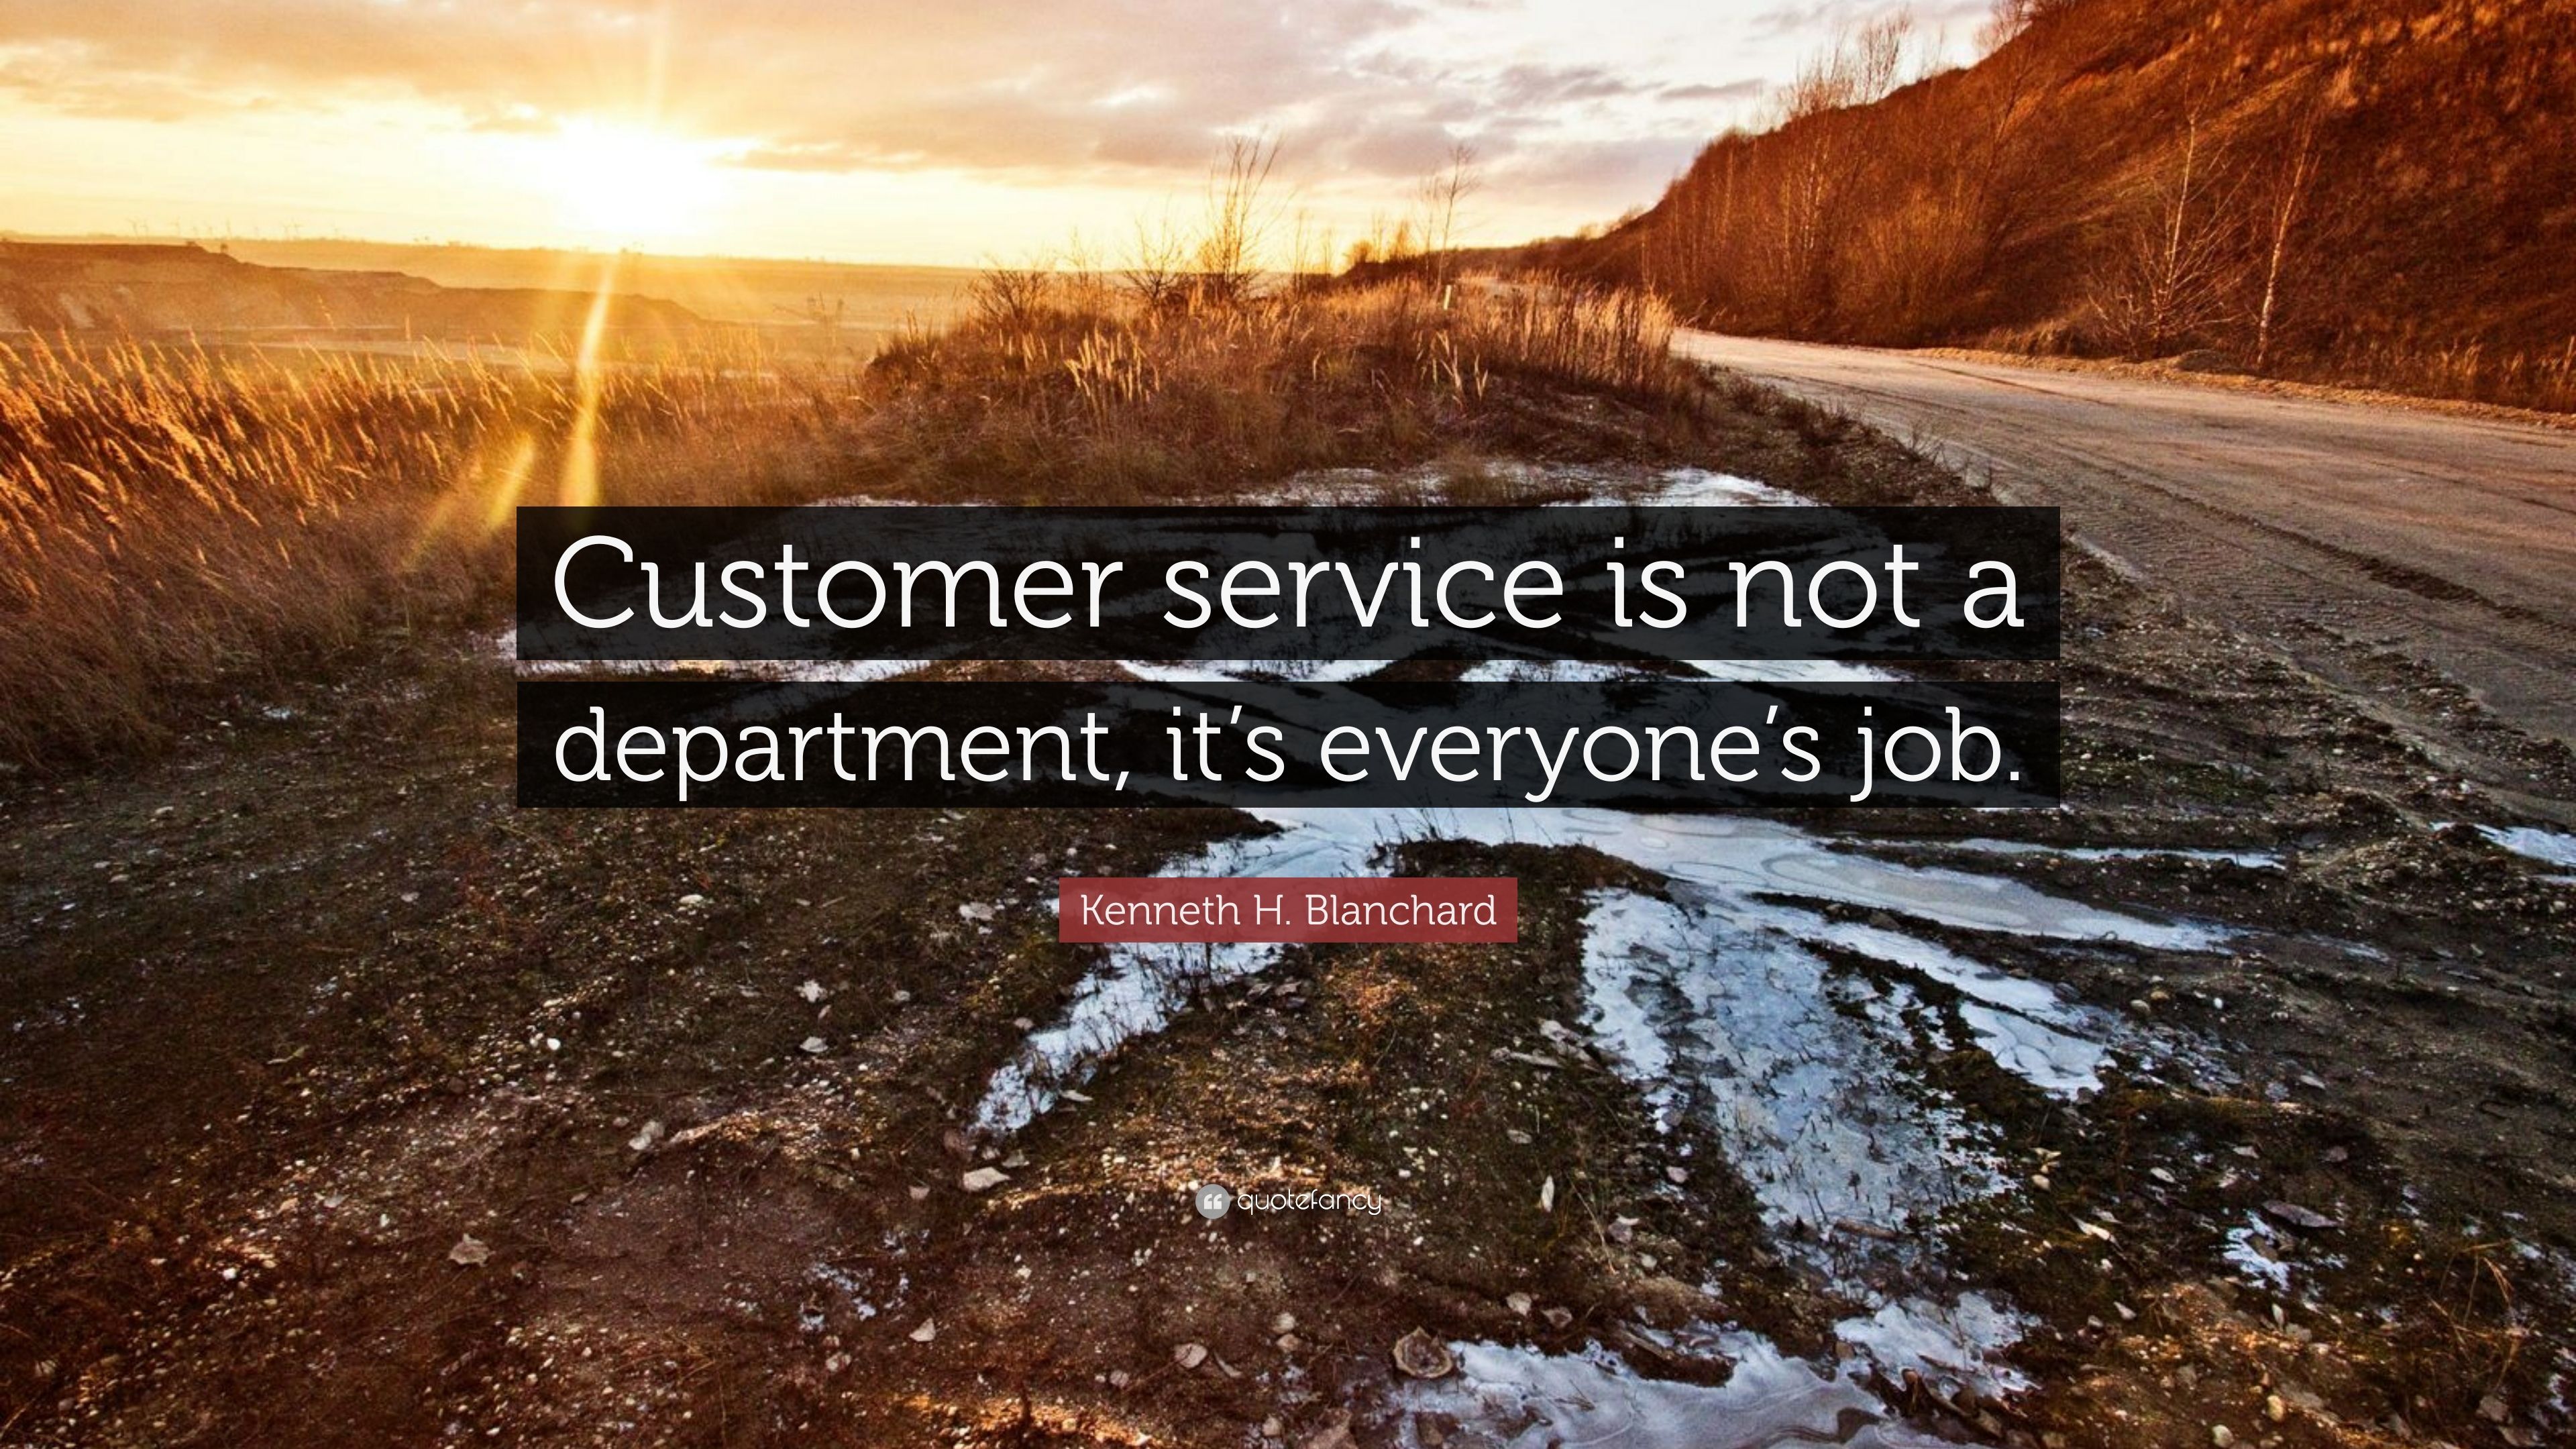 Kenneth H. Blanchard Quote: “Customer service is not a department, it's everyone's job.”